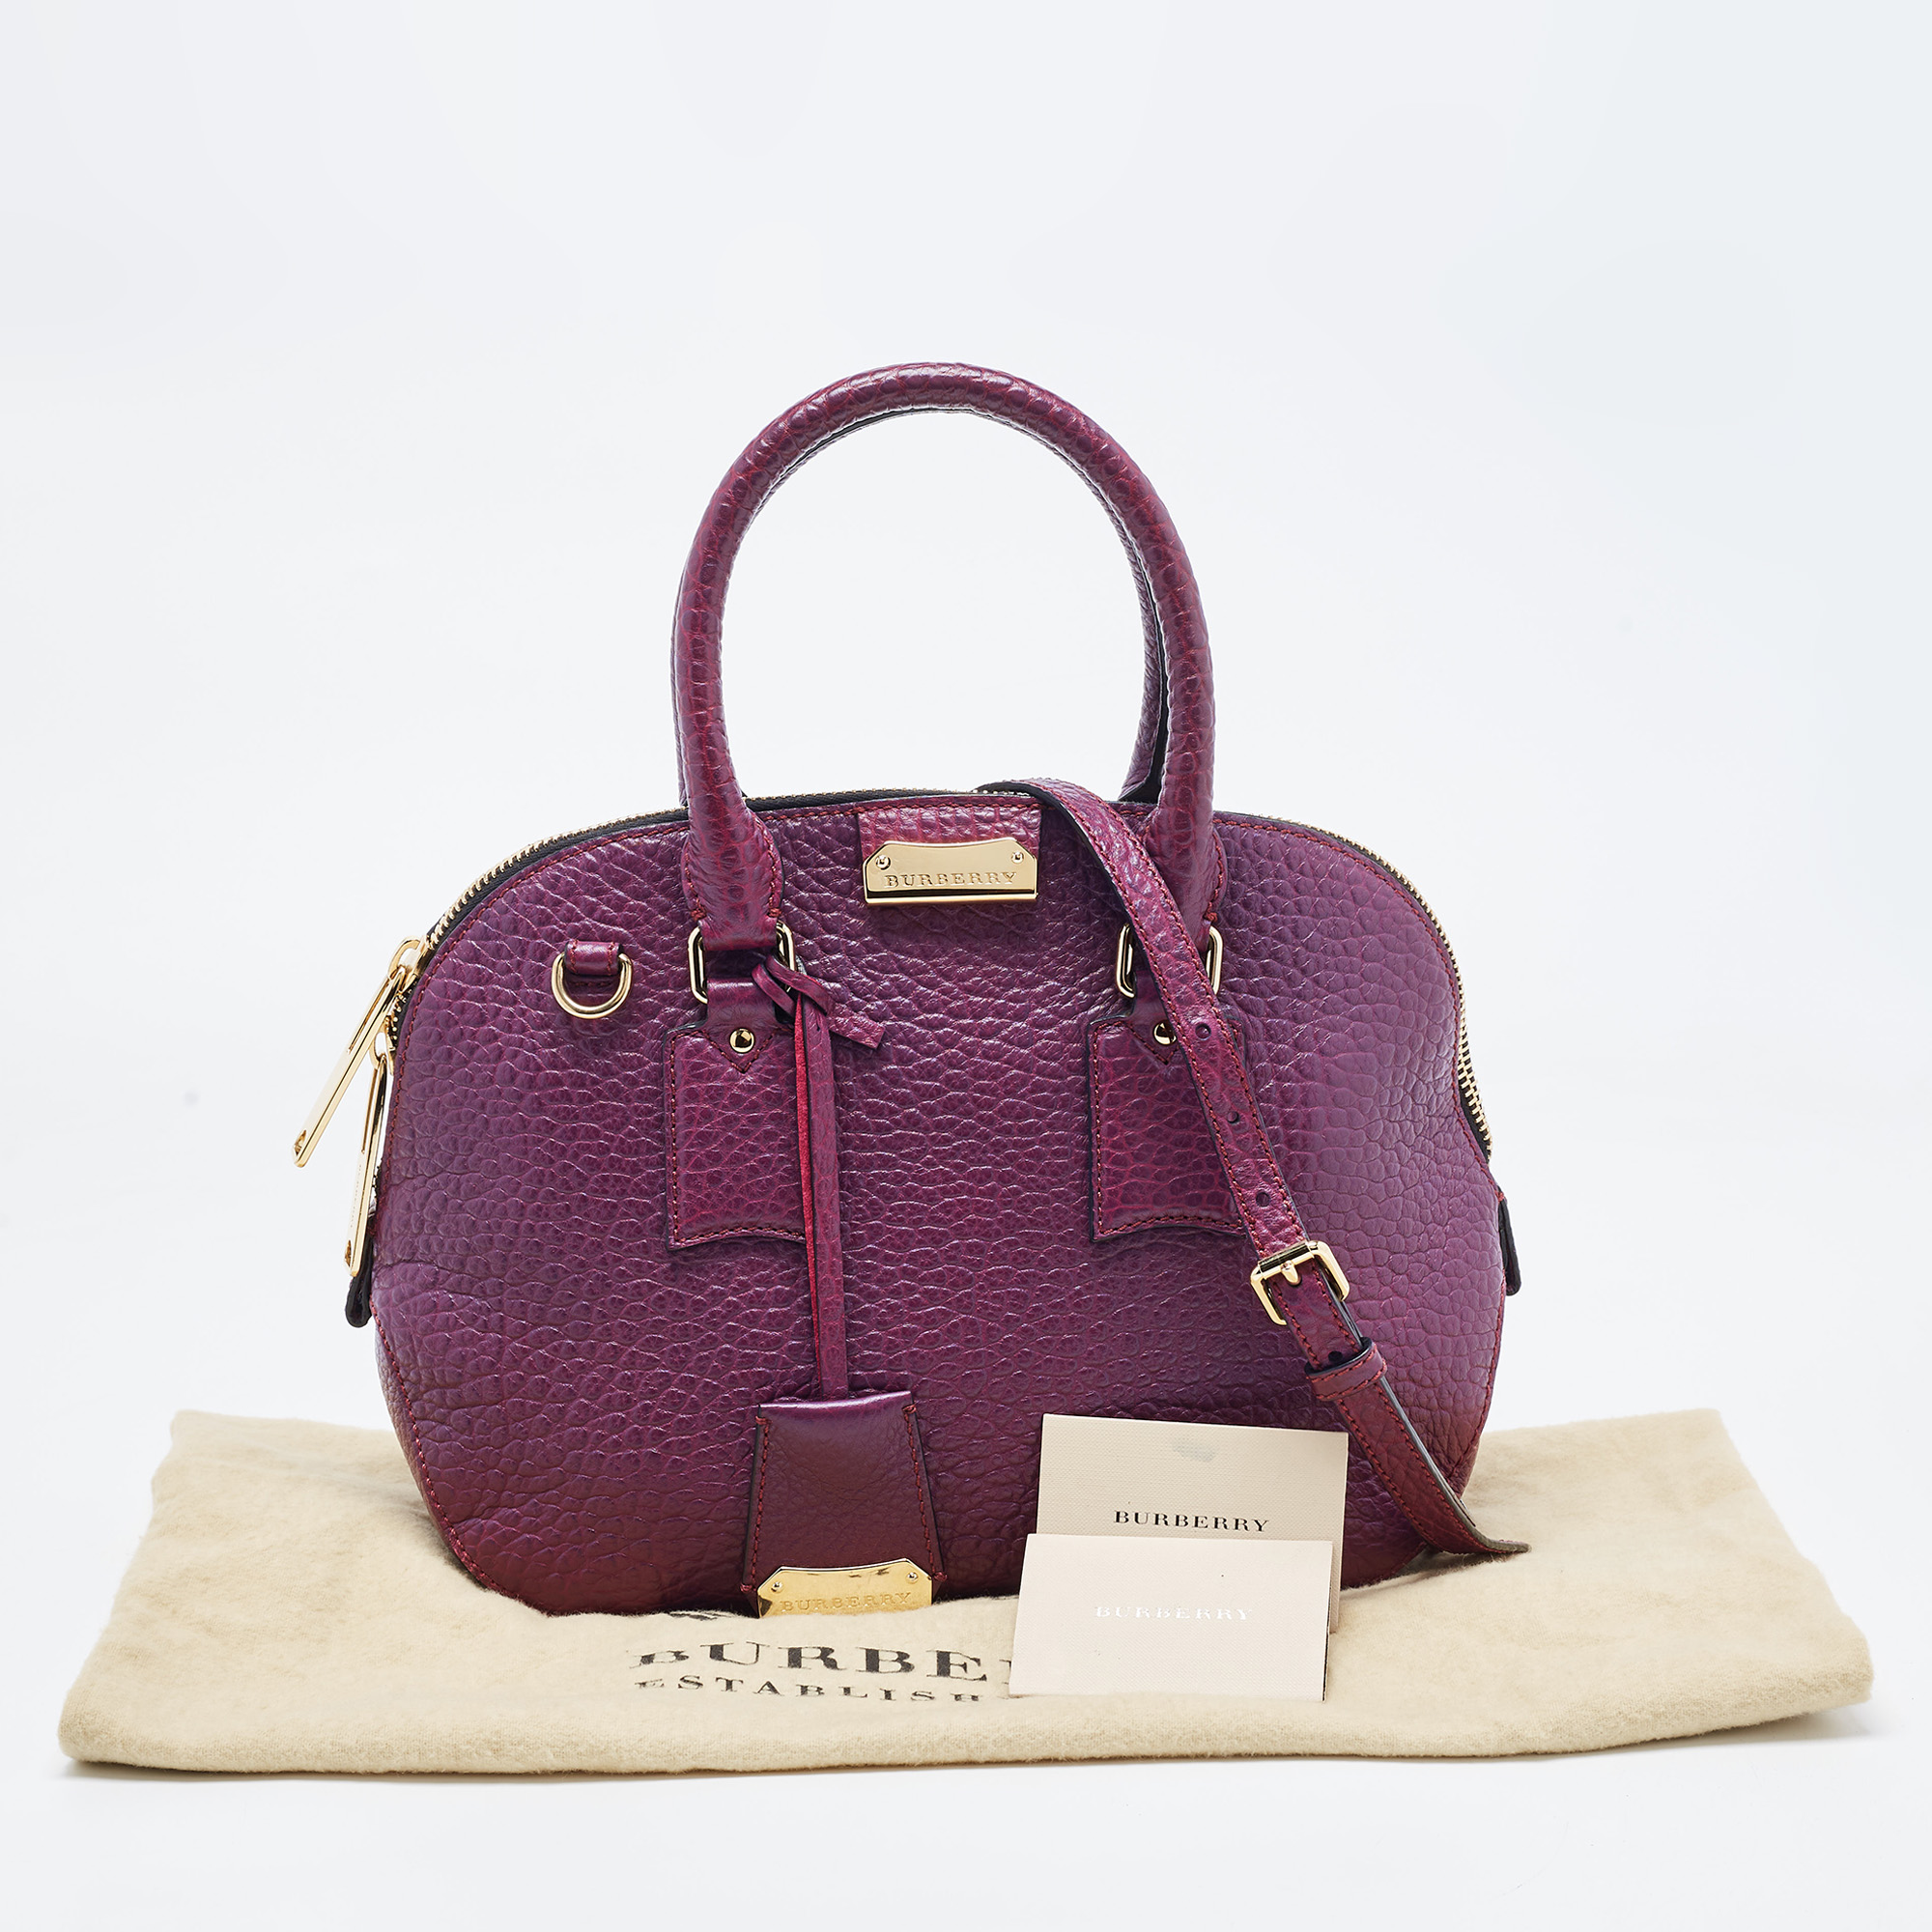 Burberry Purple Leather Orchard Bowler Bag